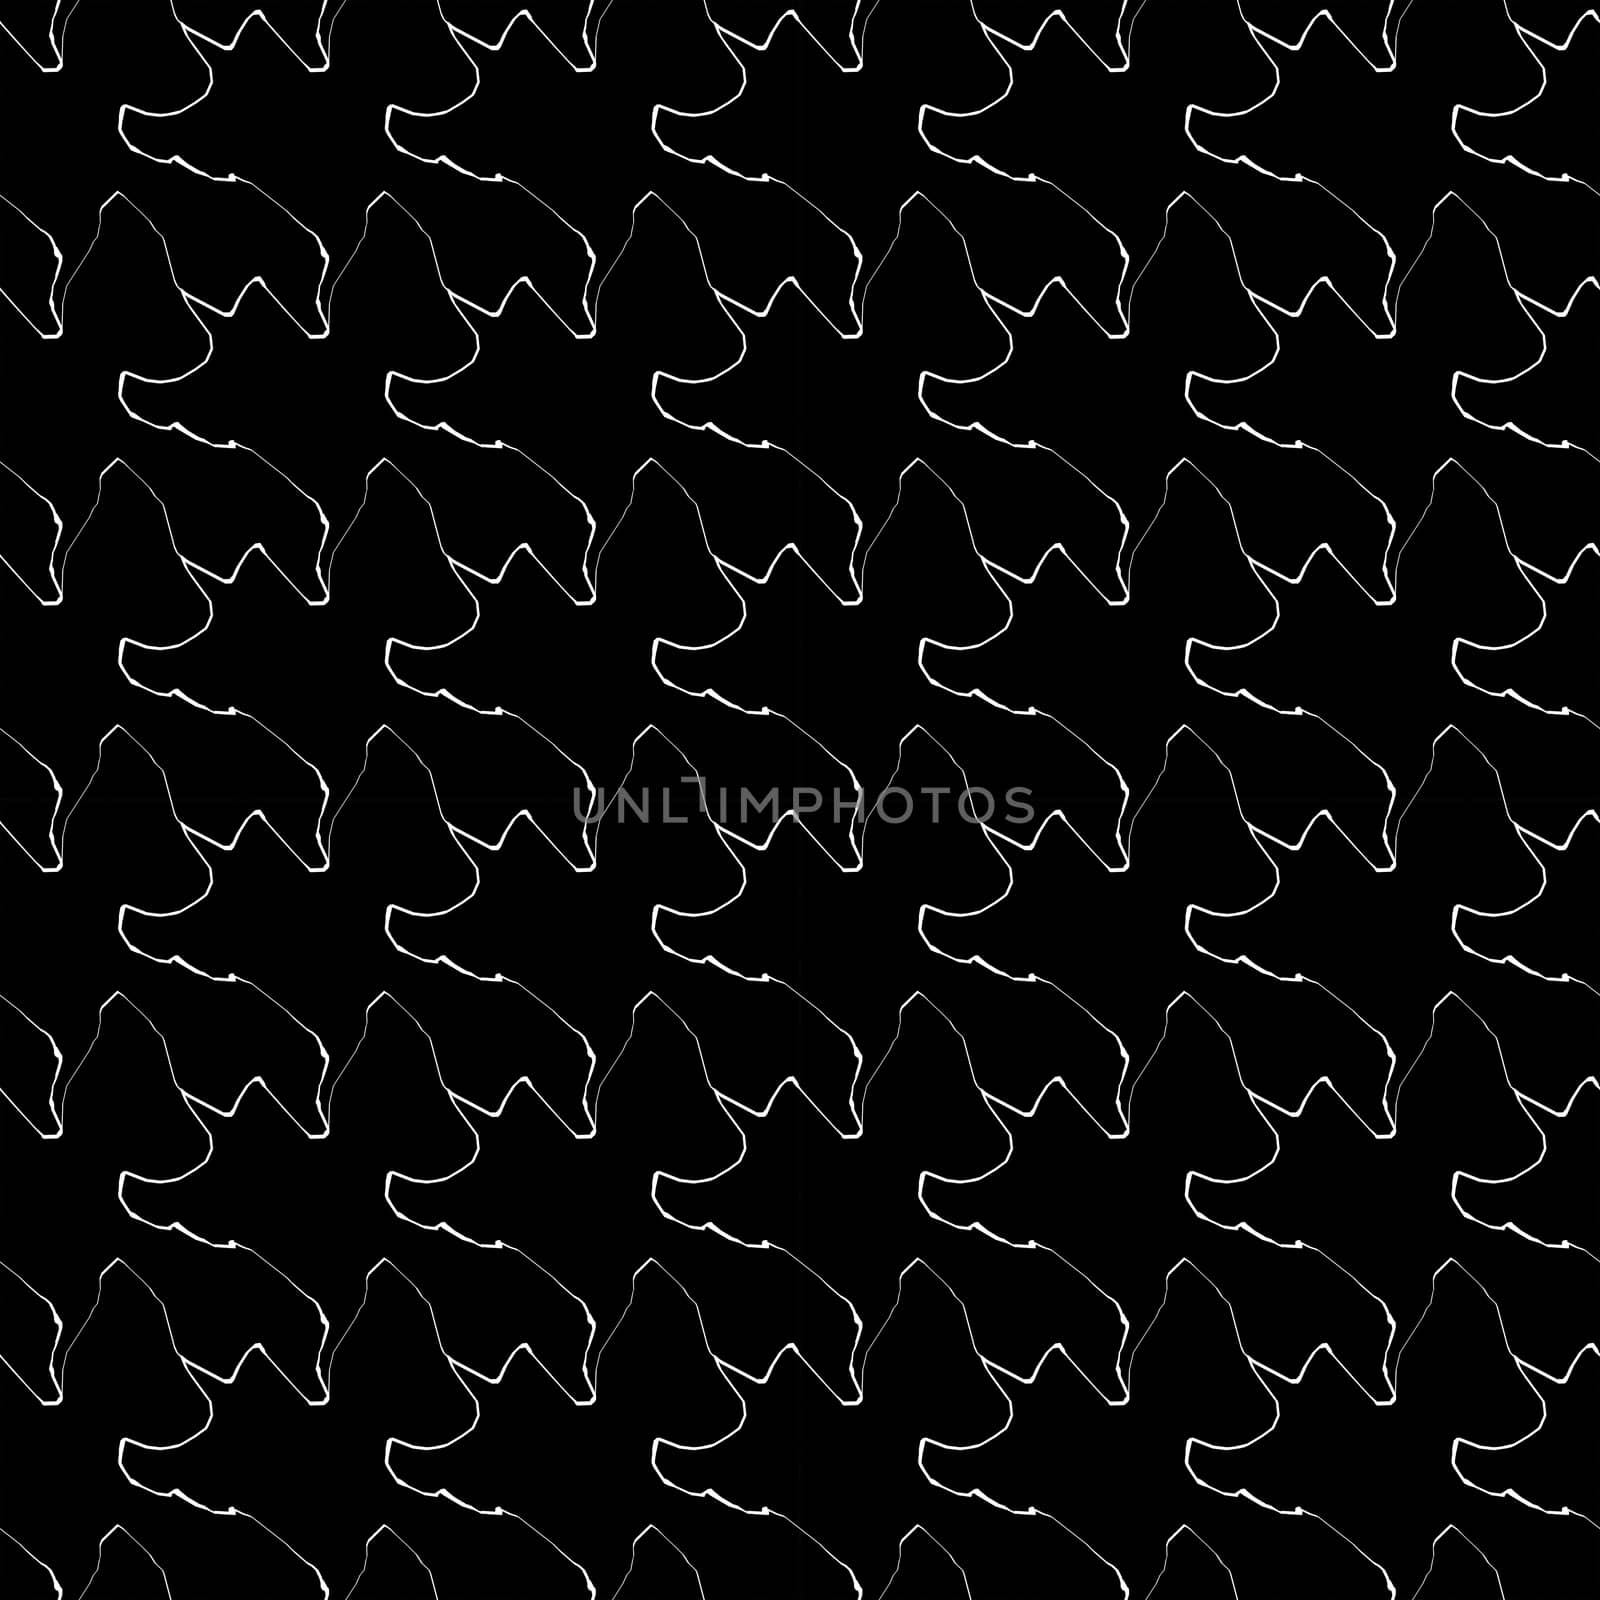 Illustration of an abstract black and white background texture